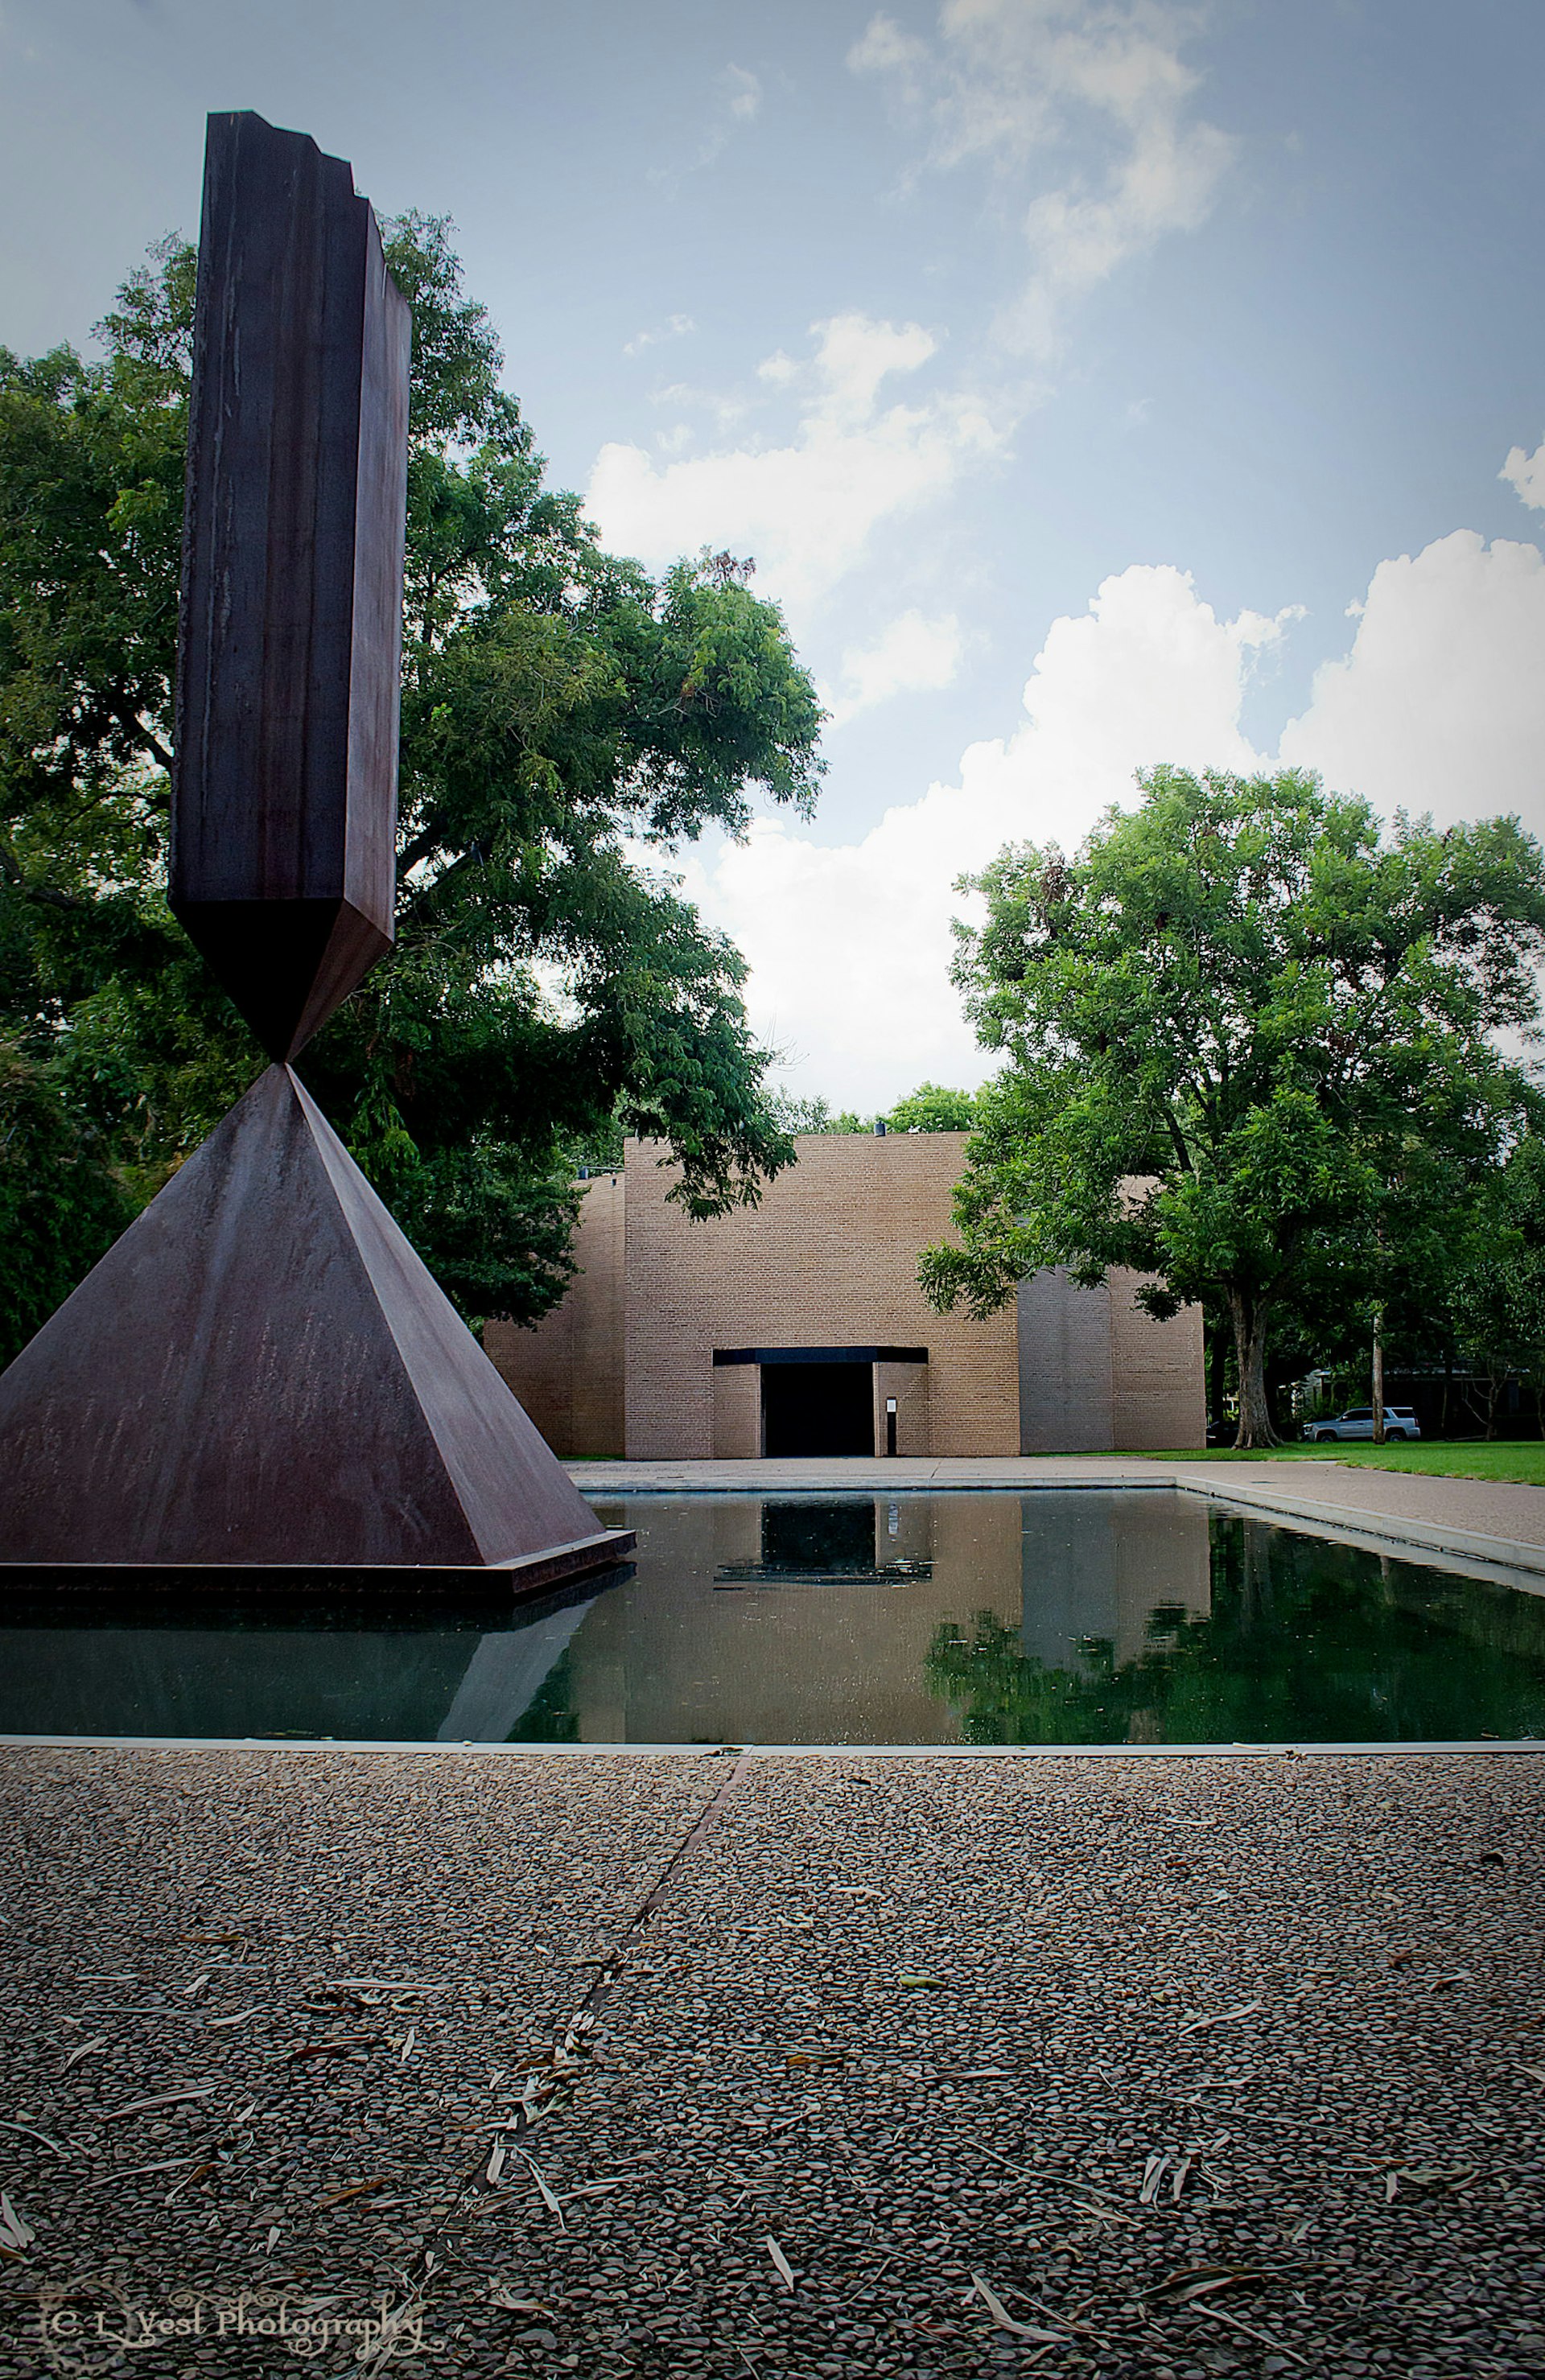 The exterior of the Rothko Chapel with its large sculpture in Houston